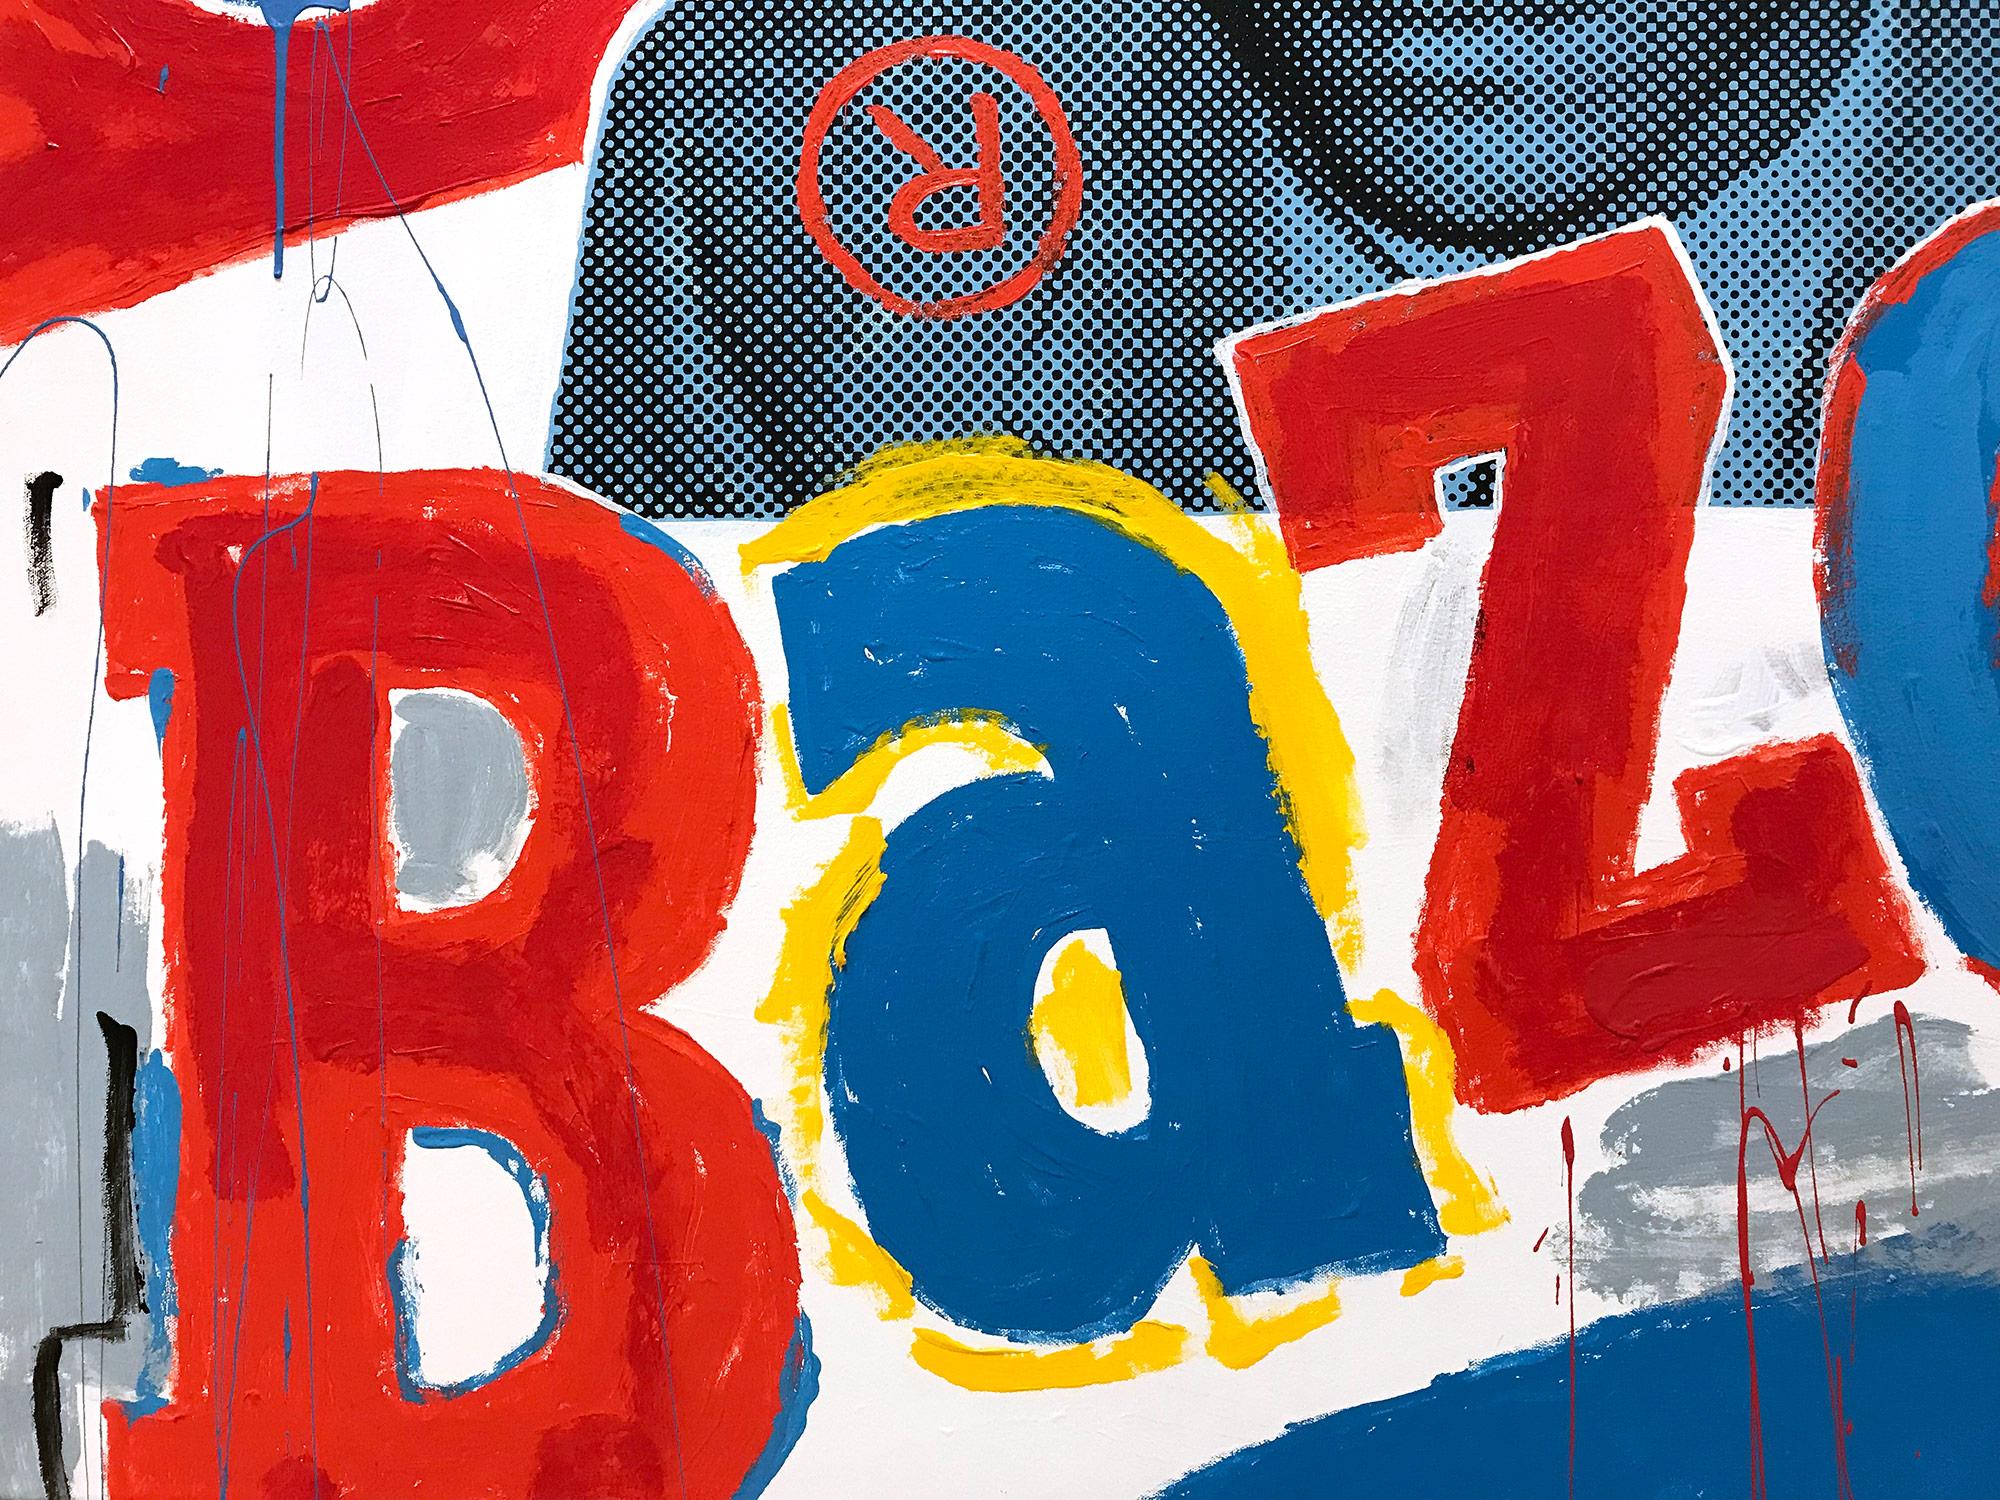 A pop piece depicting Basquiat with Bazooka Gum. With impasto painting and silkscreening we are drawn to the movement, as the artist is able to engage his viewer with contrasting highlights and shadow. This piece is on gallery wrap canvas and is